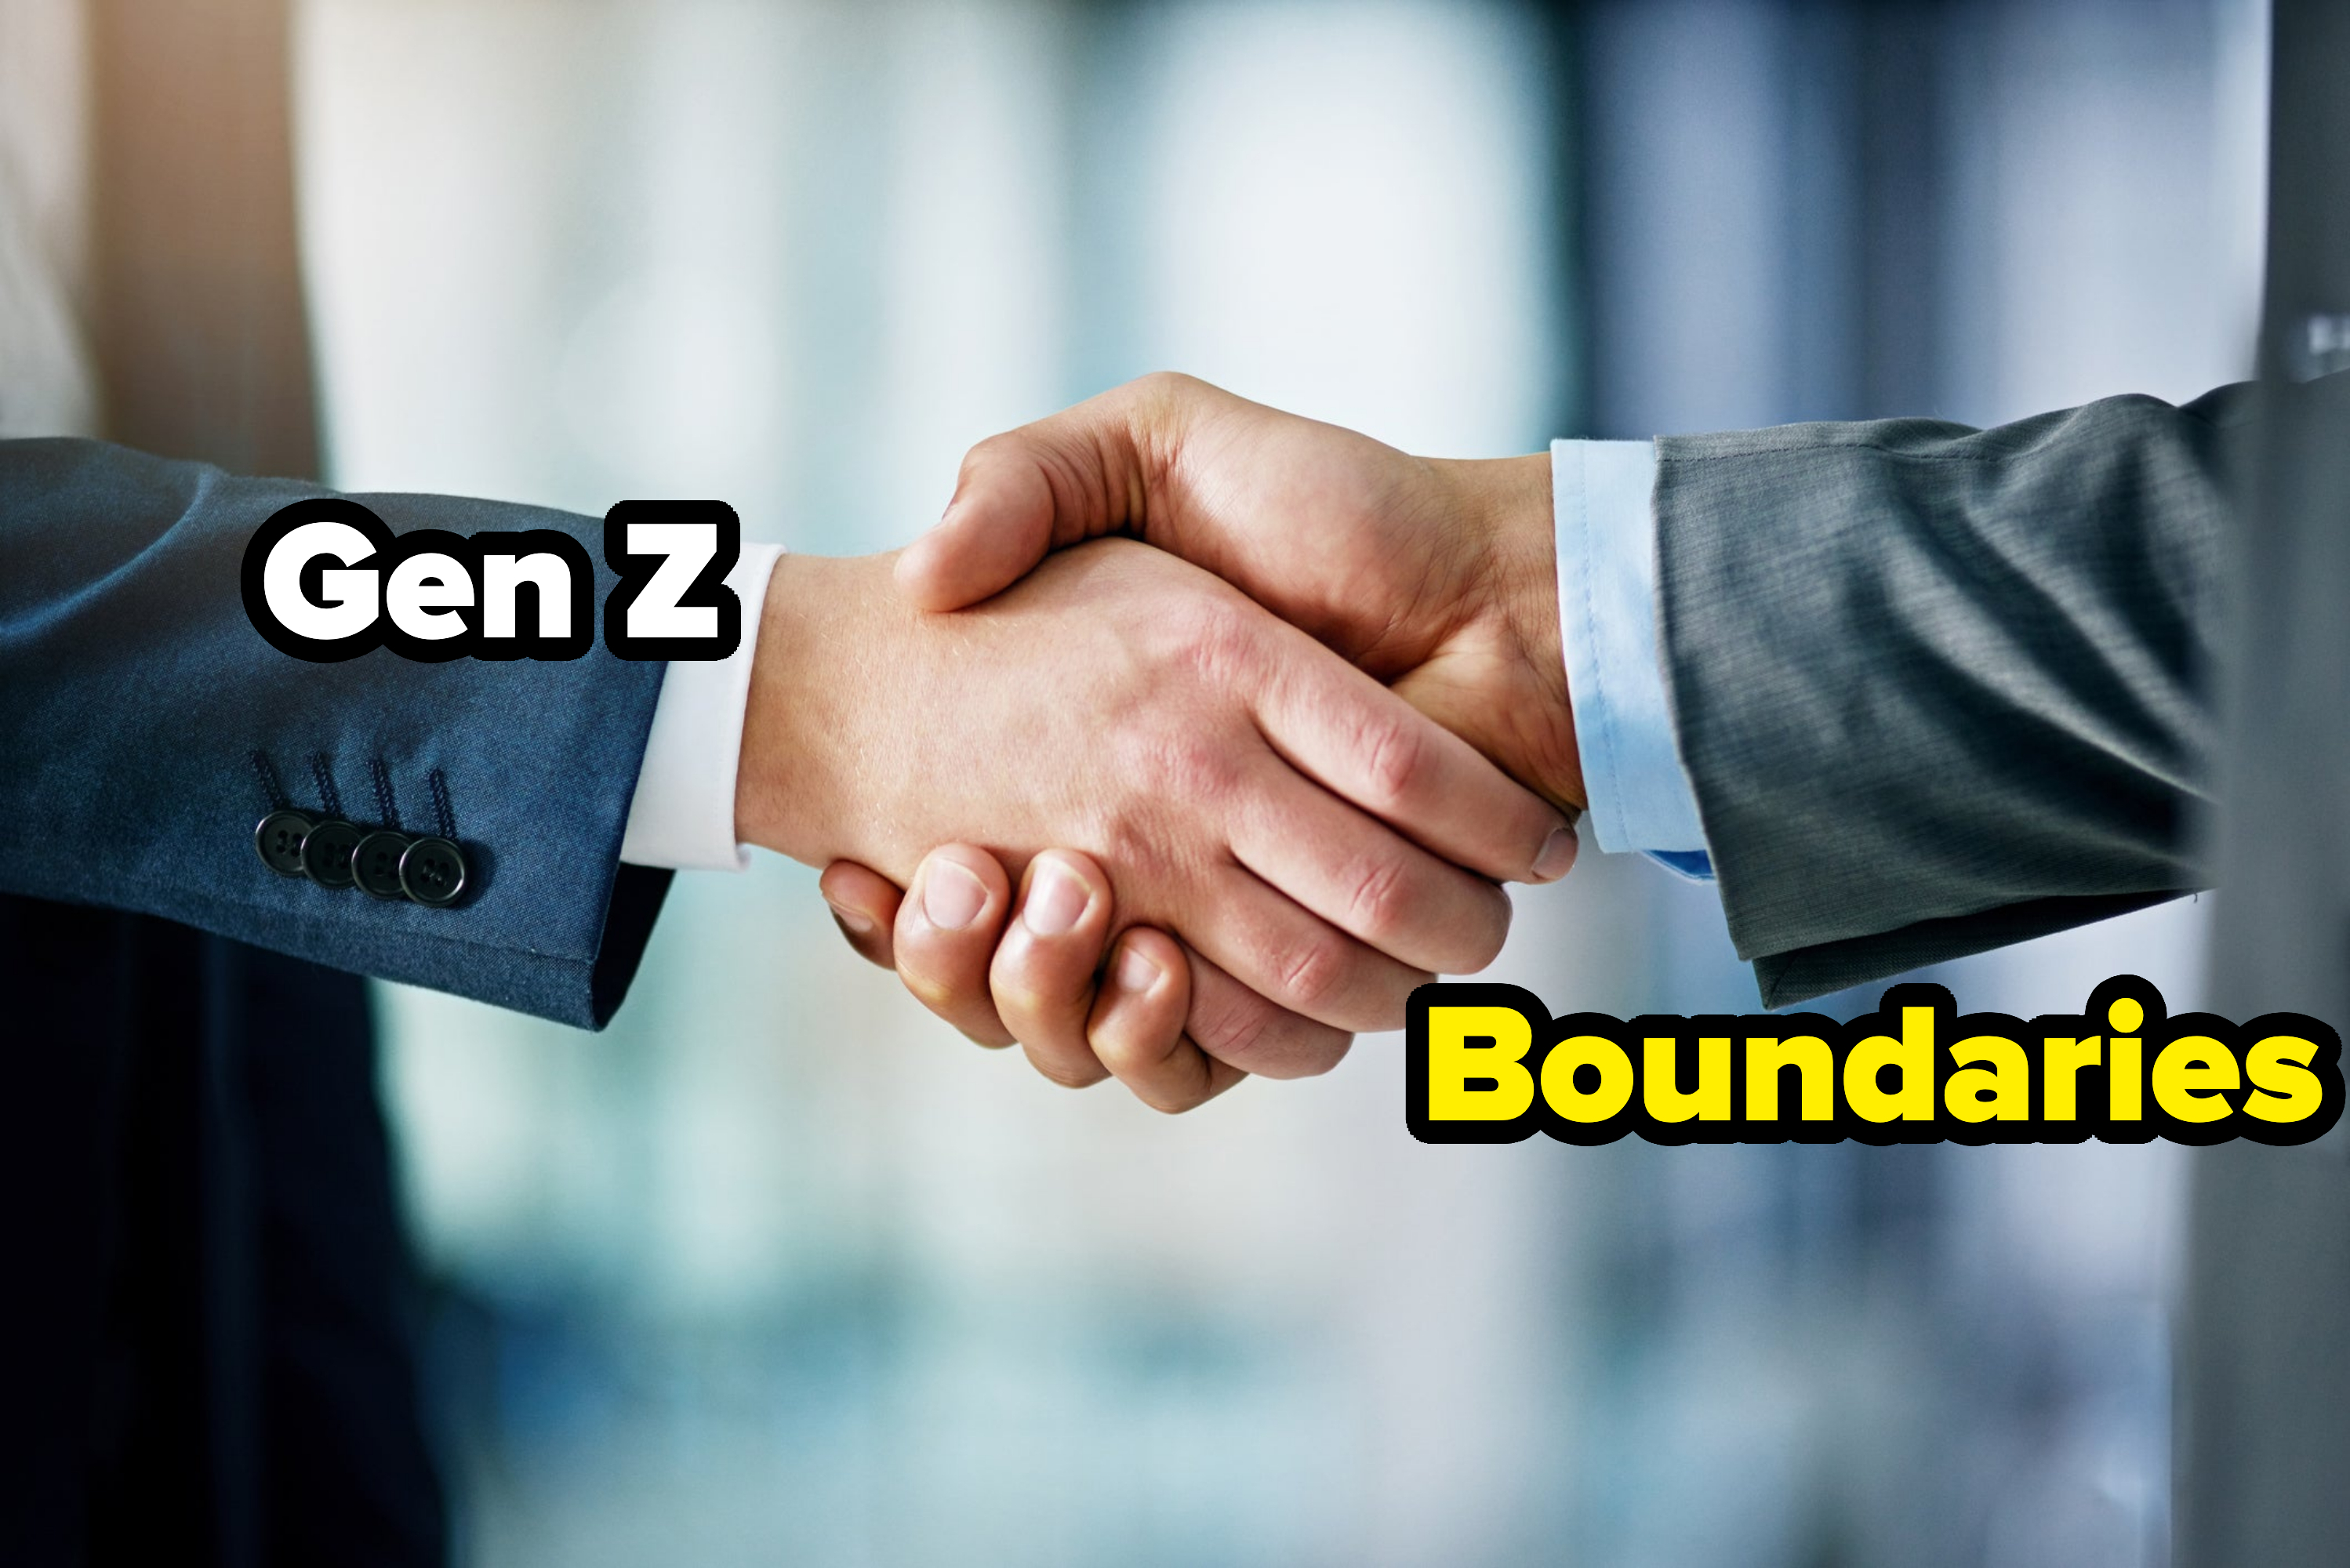 Closeup shot of two businessmen shaking hands in an office compared to Gen Z shaking hands with Boundaries